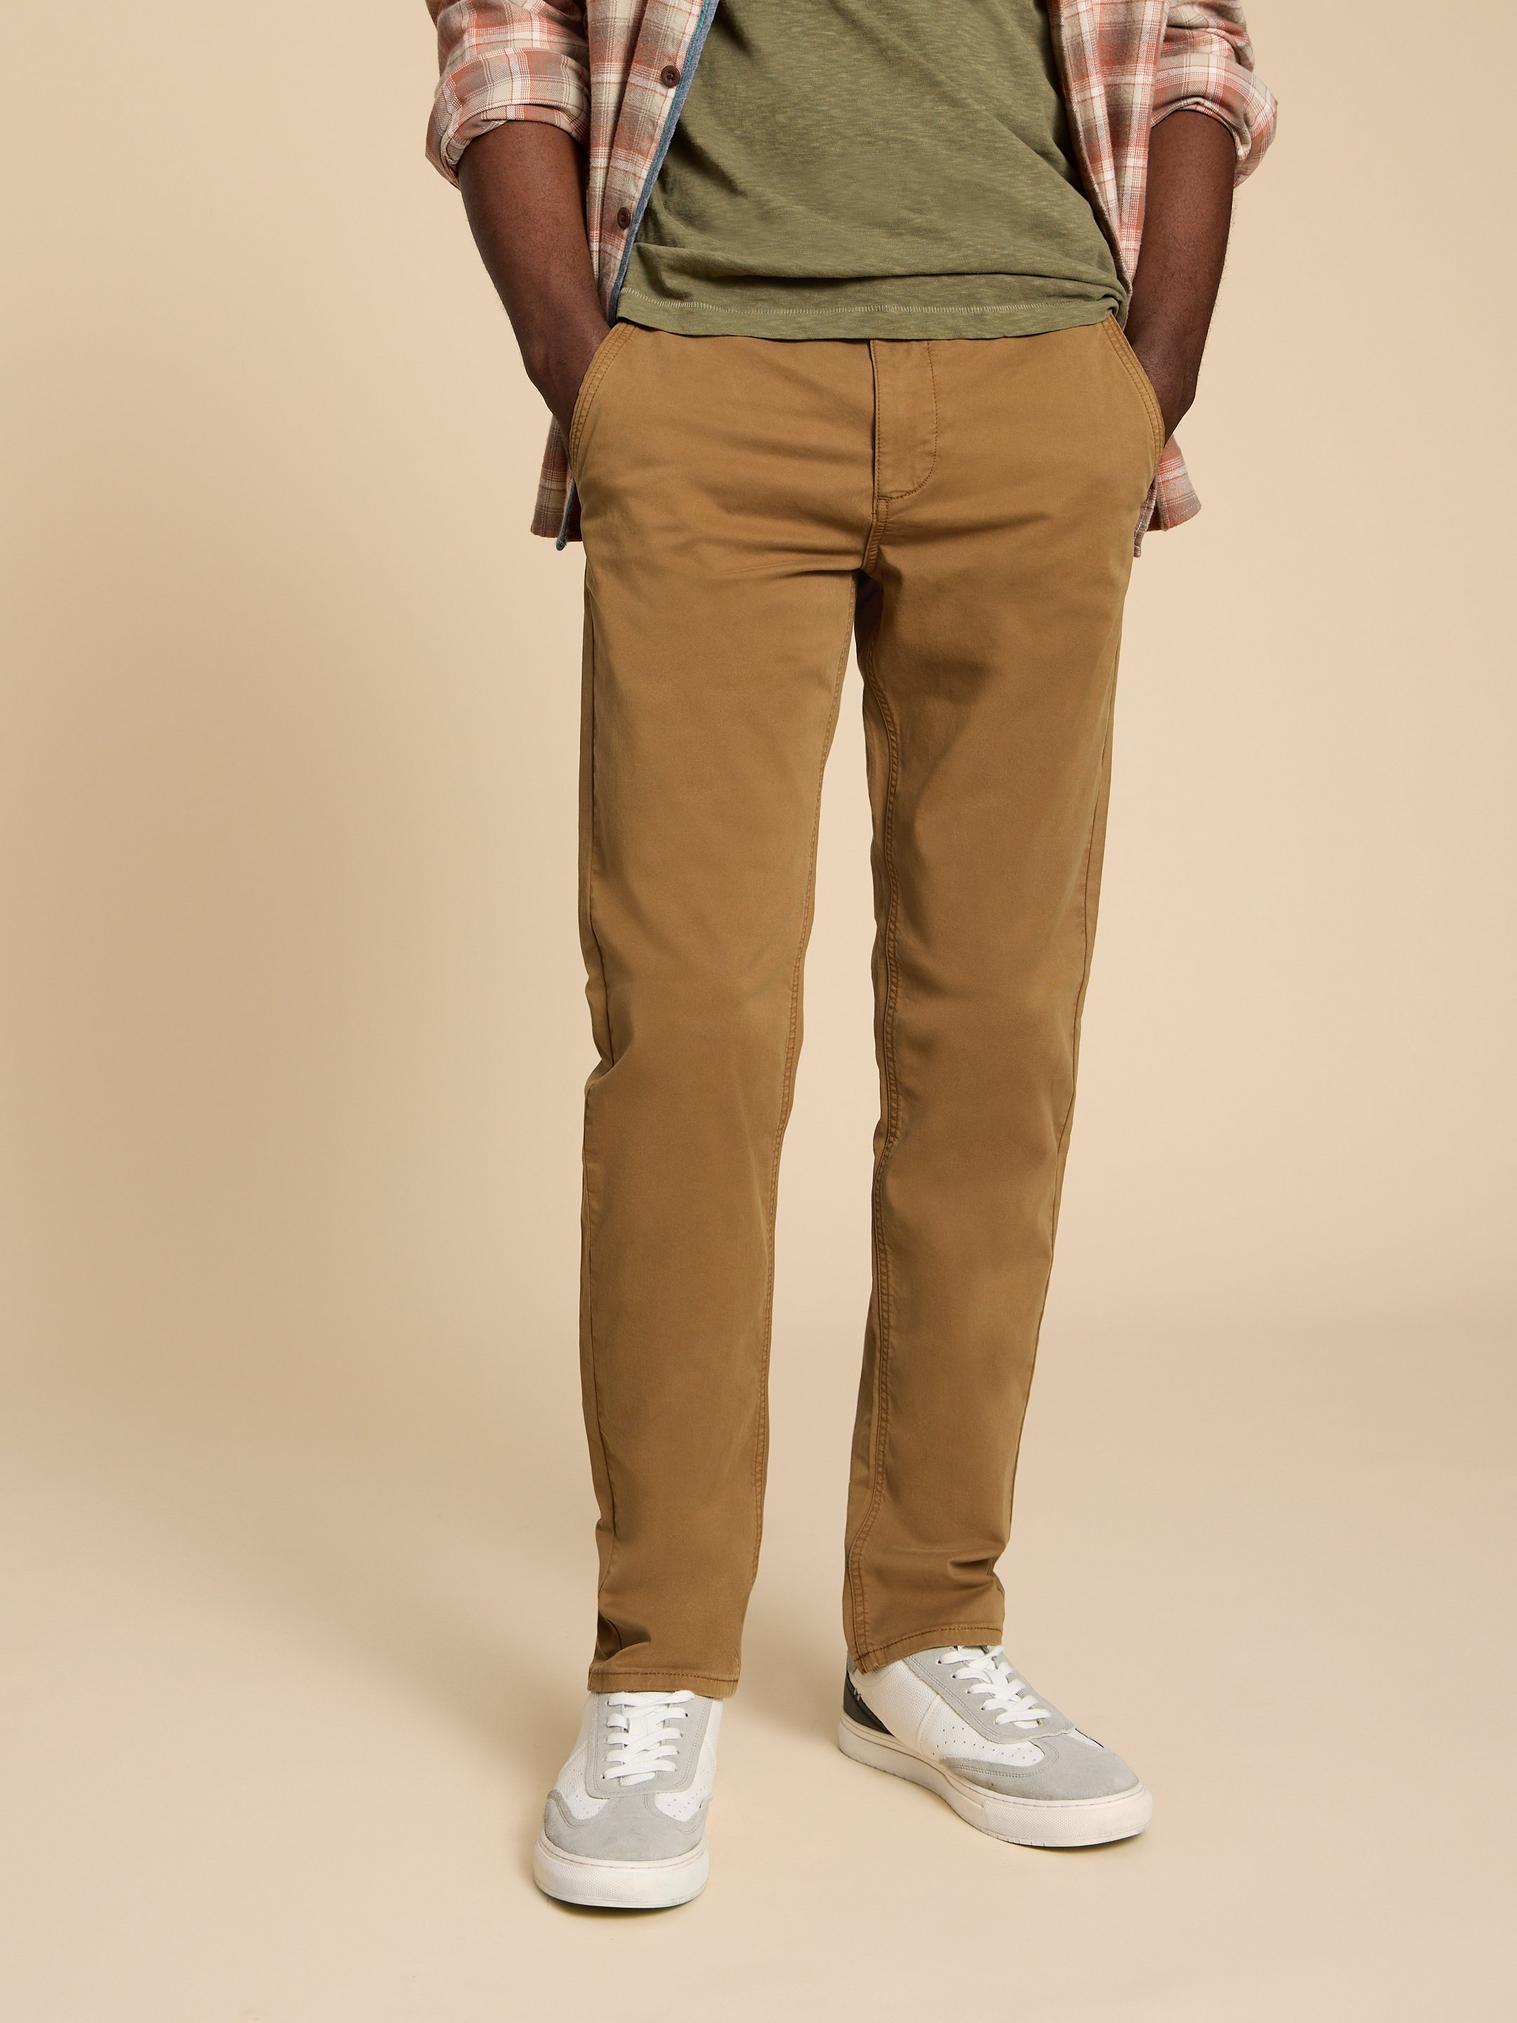 Sutton Organic Chino Trouser in MID BROWN - LIFESTYLE